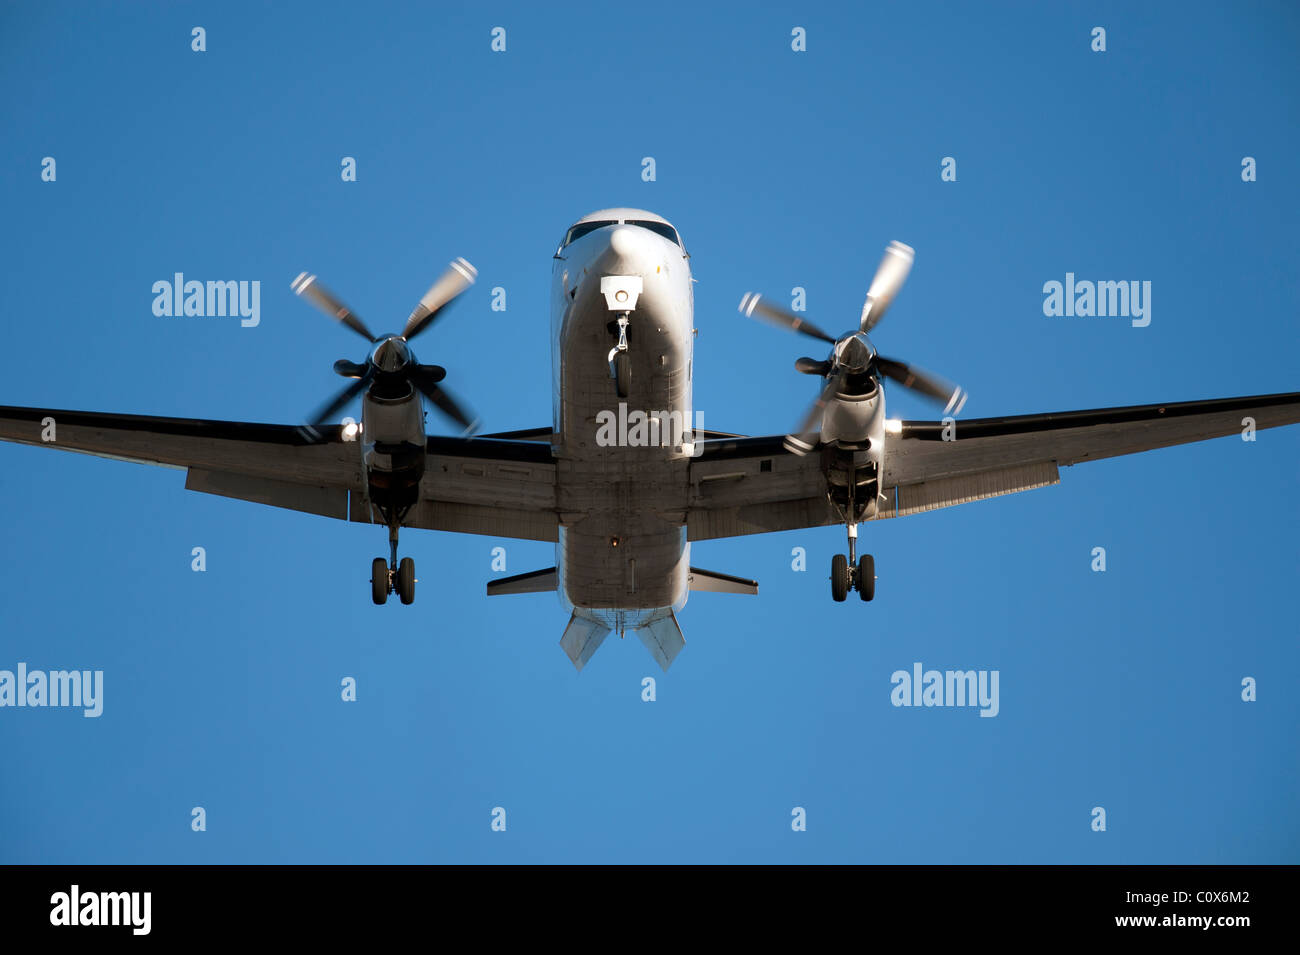 Two propeller engine aircraft before landing in Vancouver Stock Photo